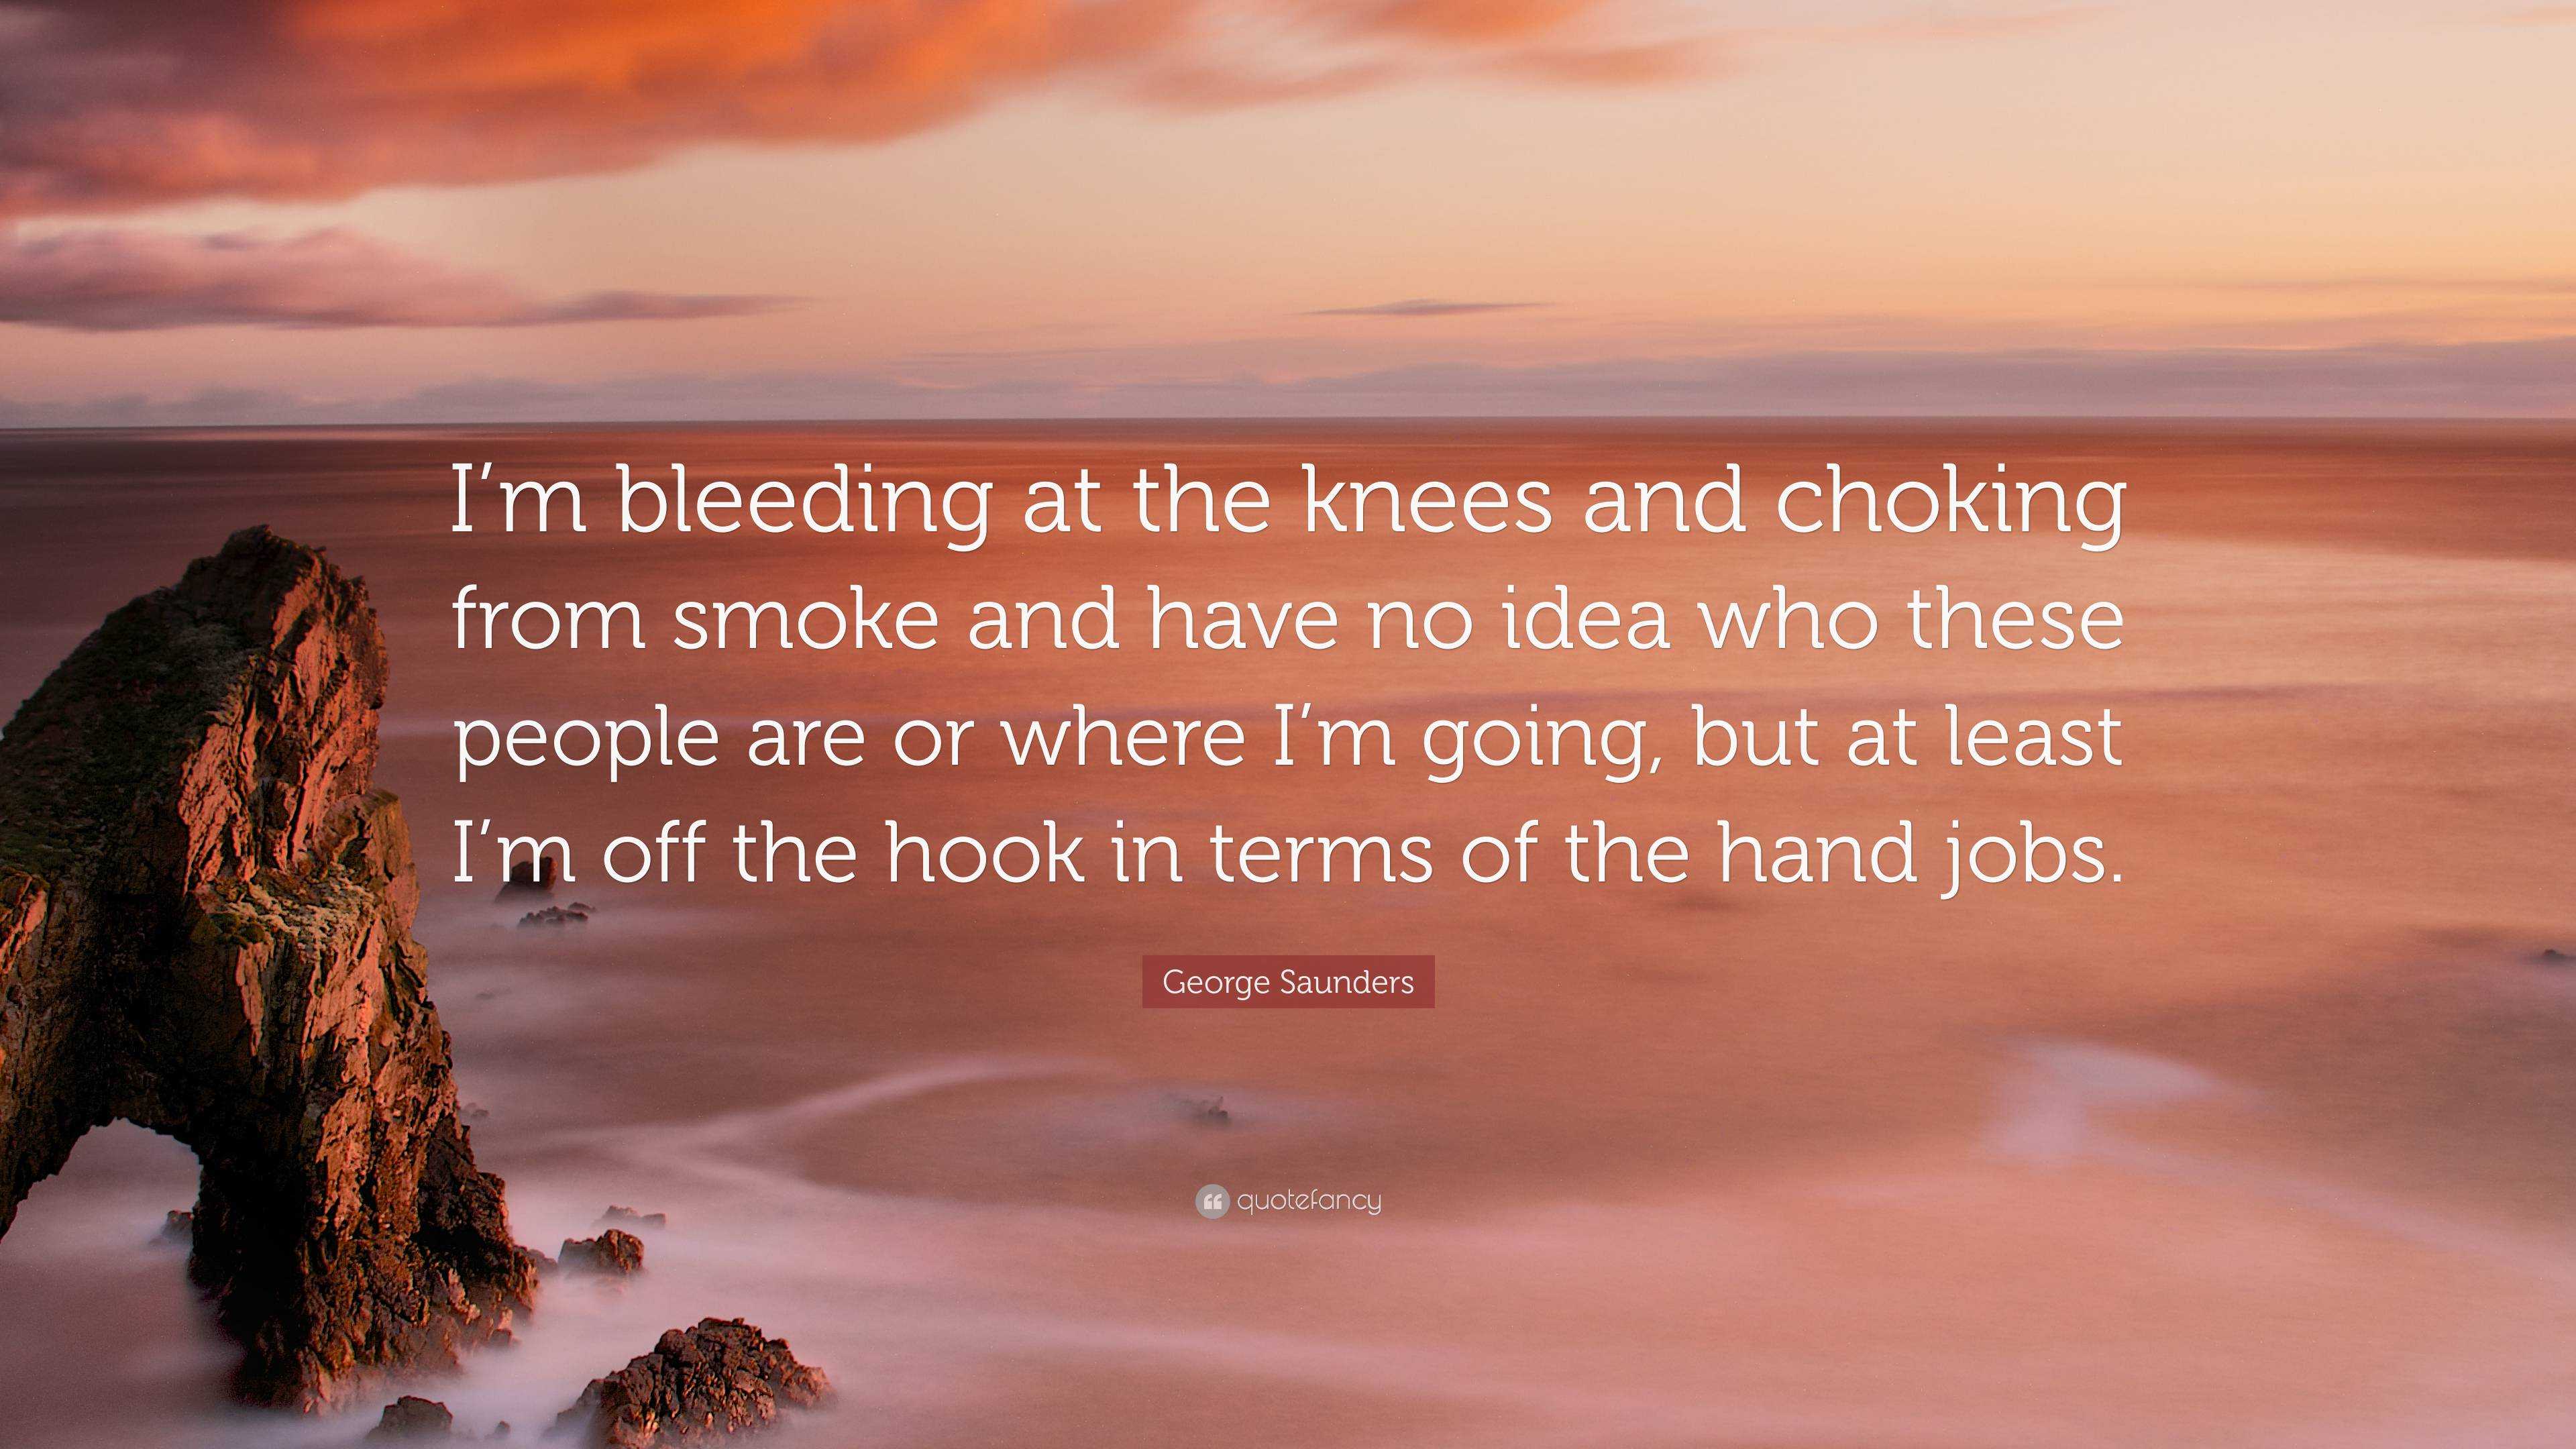 George Saunders Quote: “I'm bleeding at the knees and choking from